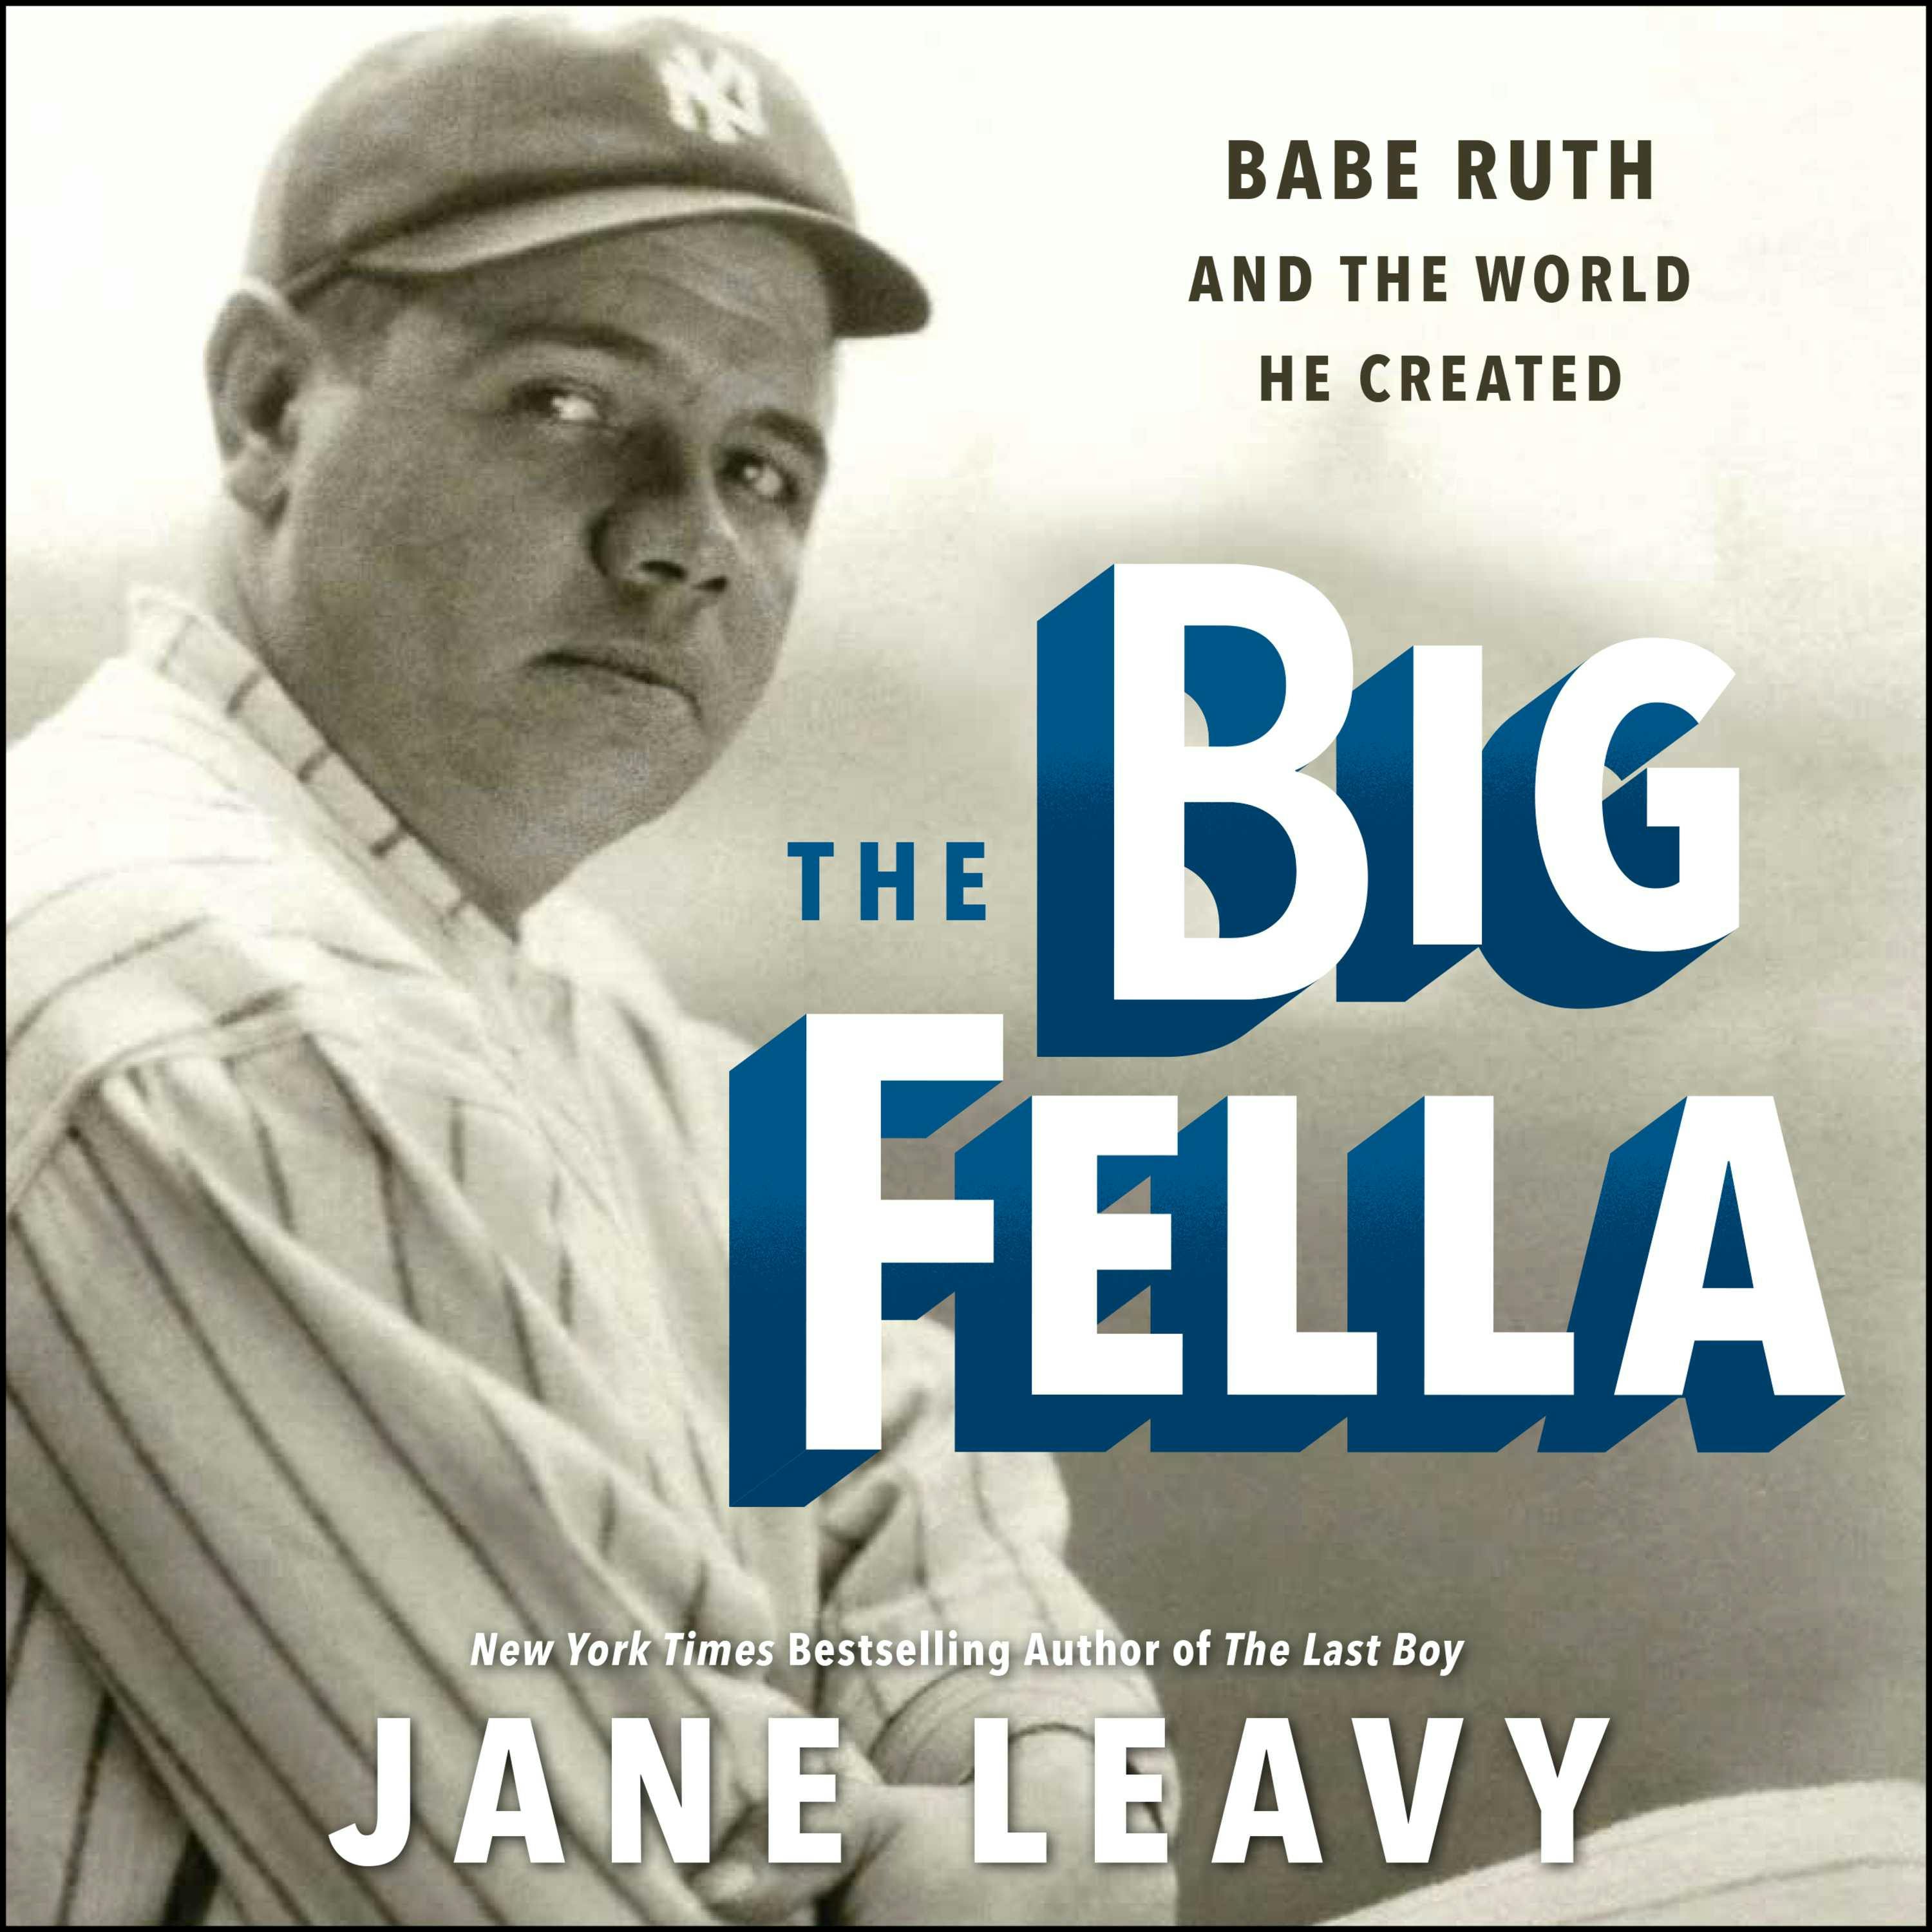 The Big Fella: Babe Ruth and the World He Created - Jane Leavy